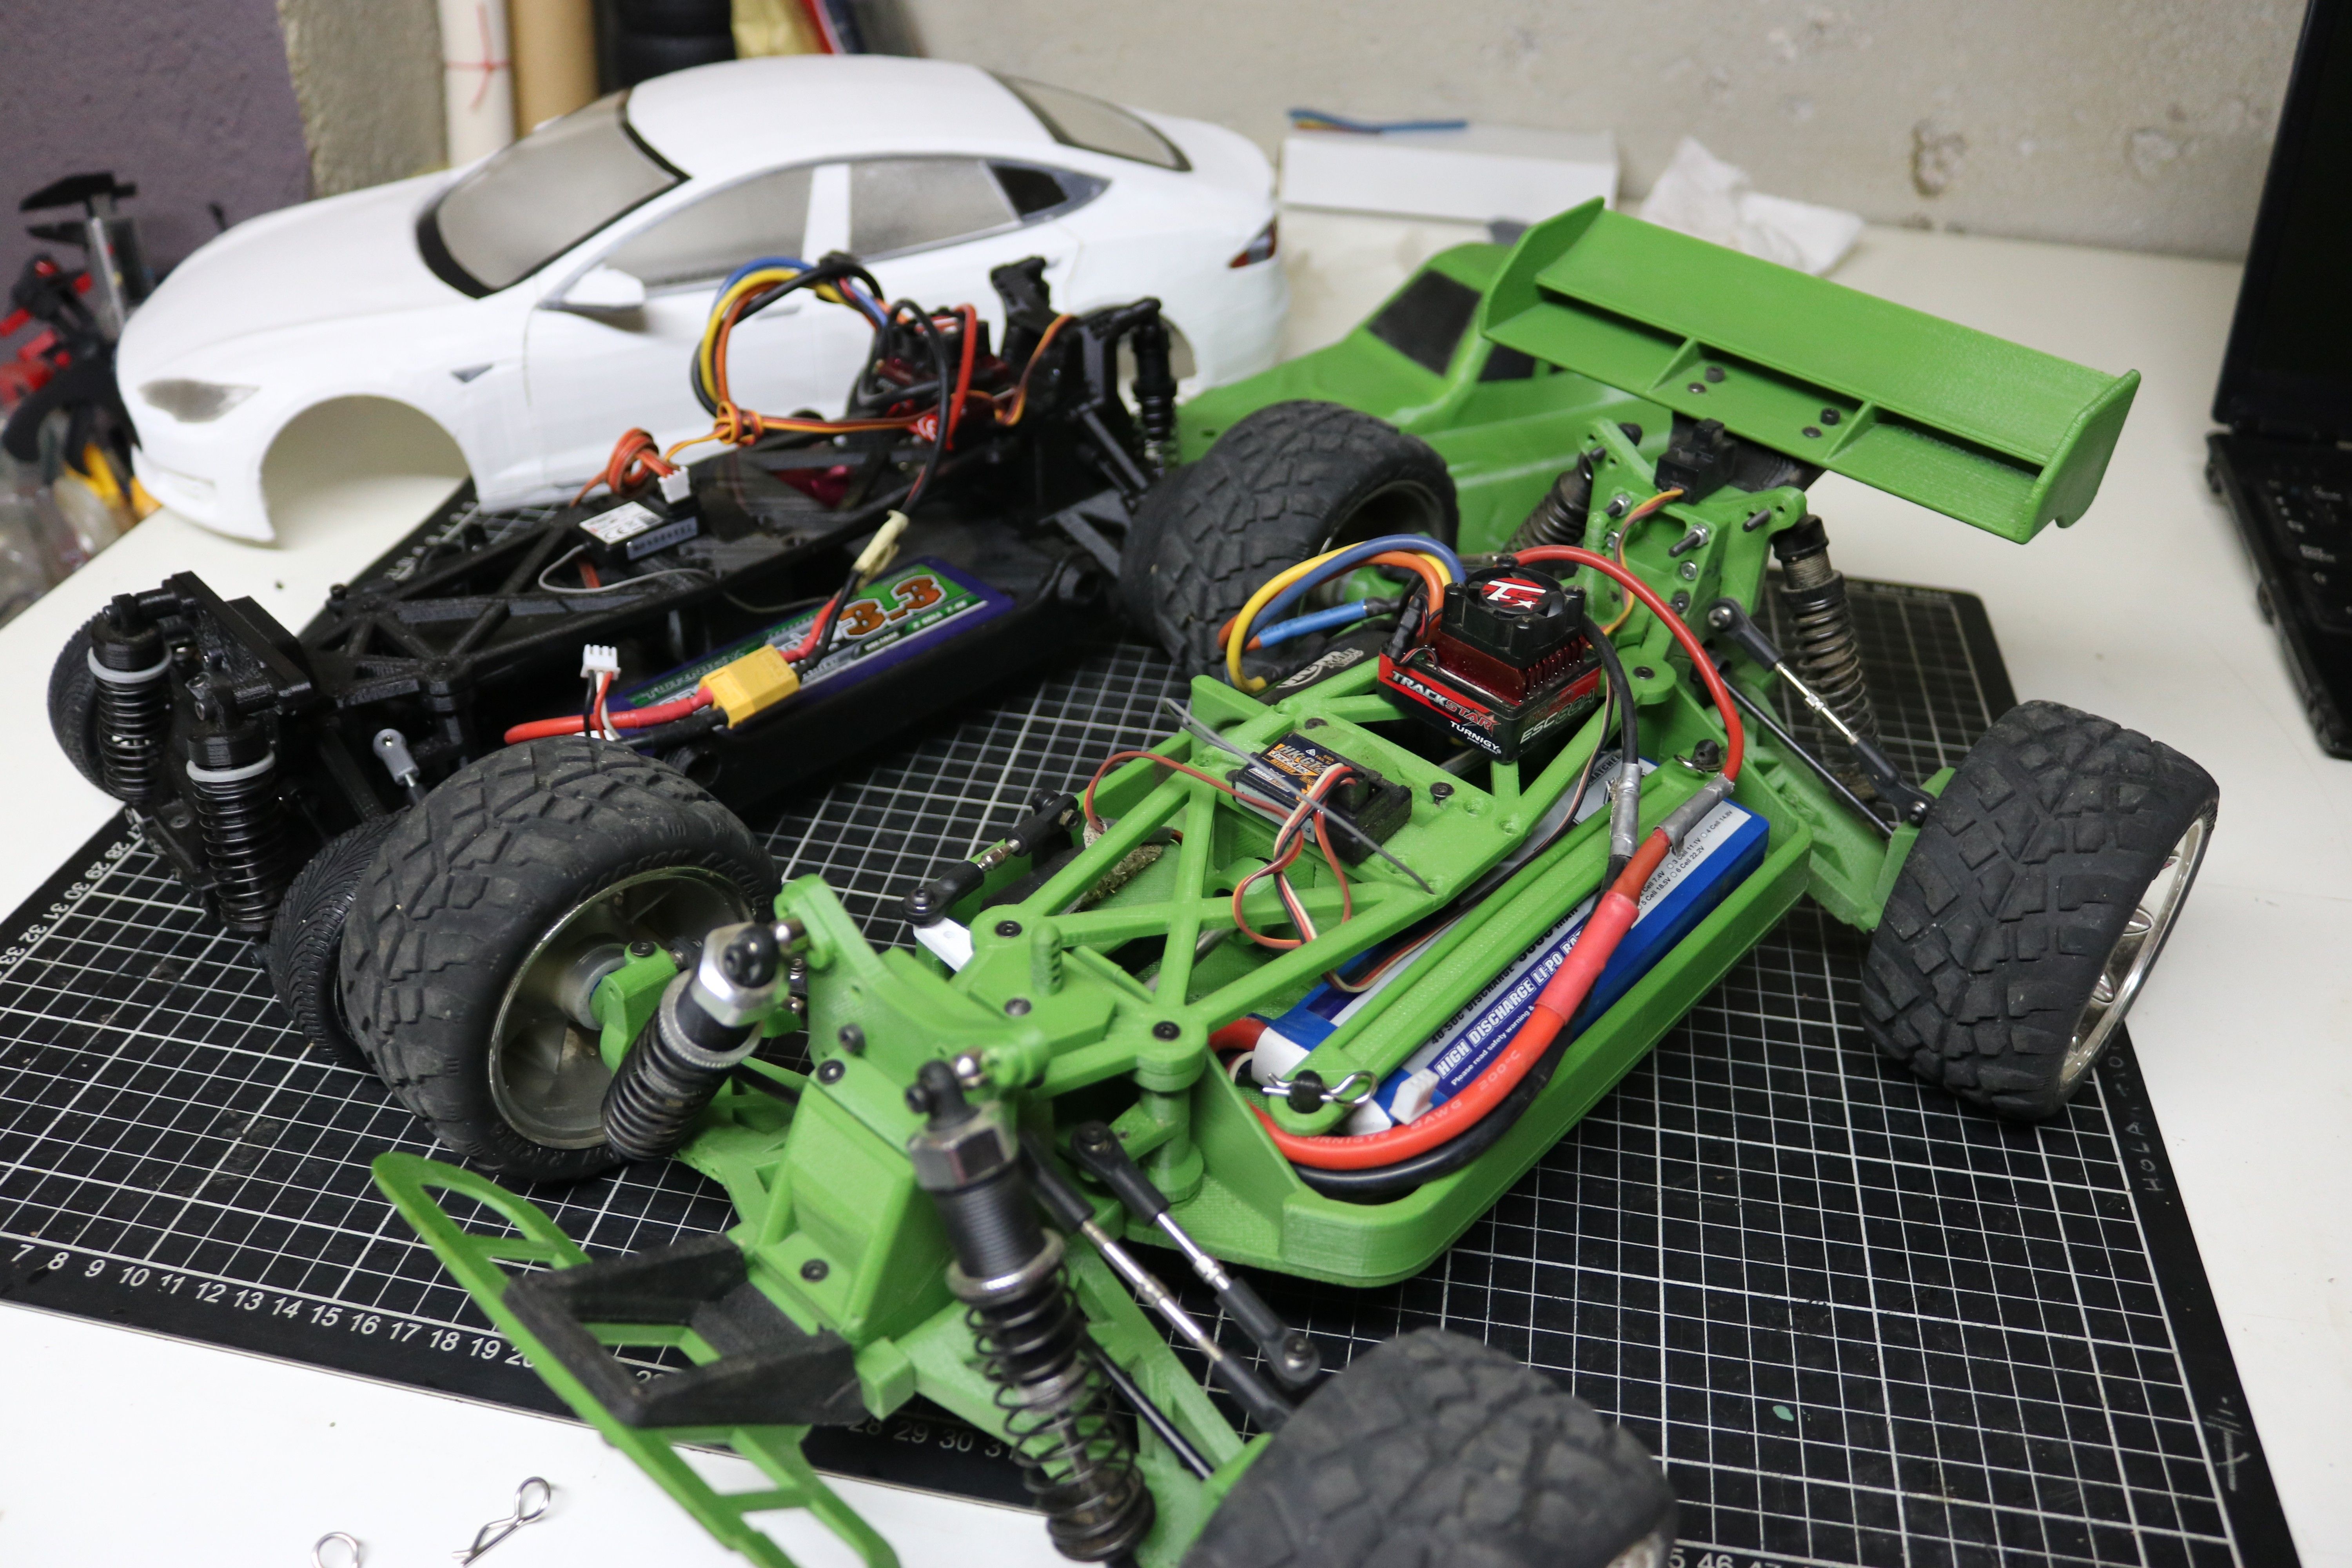 IMG_5062.JPG Download STL file MyRCCar 1/10 OBTS Chassis Updated. Customizable chassis for On-Road, Buggy, Truggy or SCT RC Car • Template to 3D print, dlb5